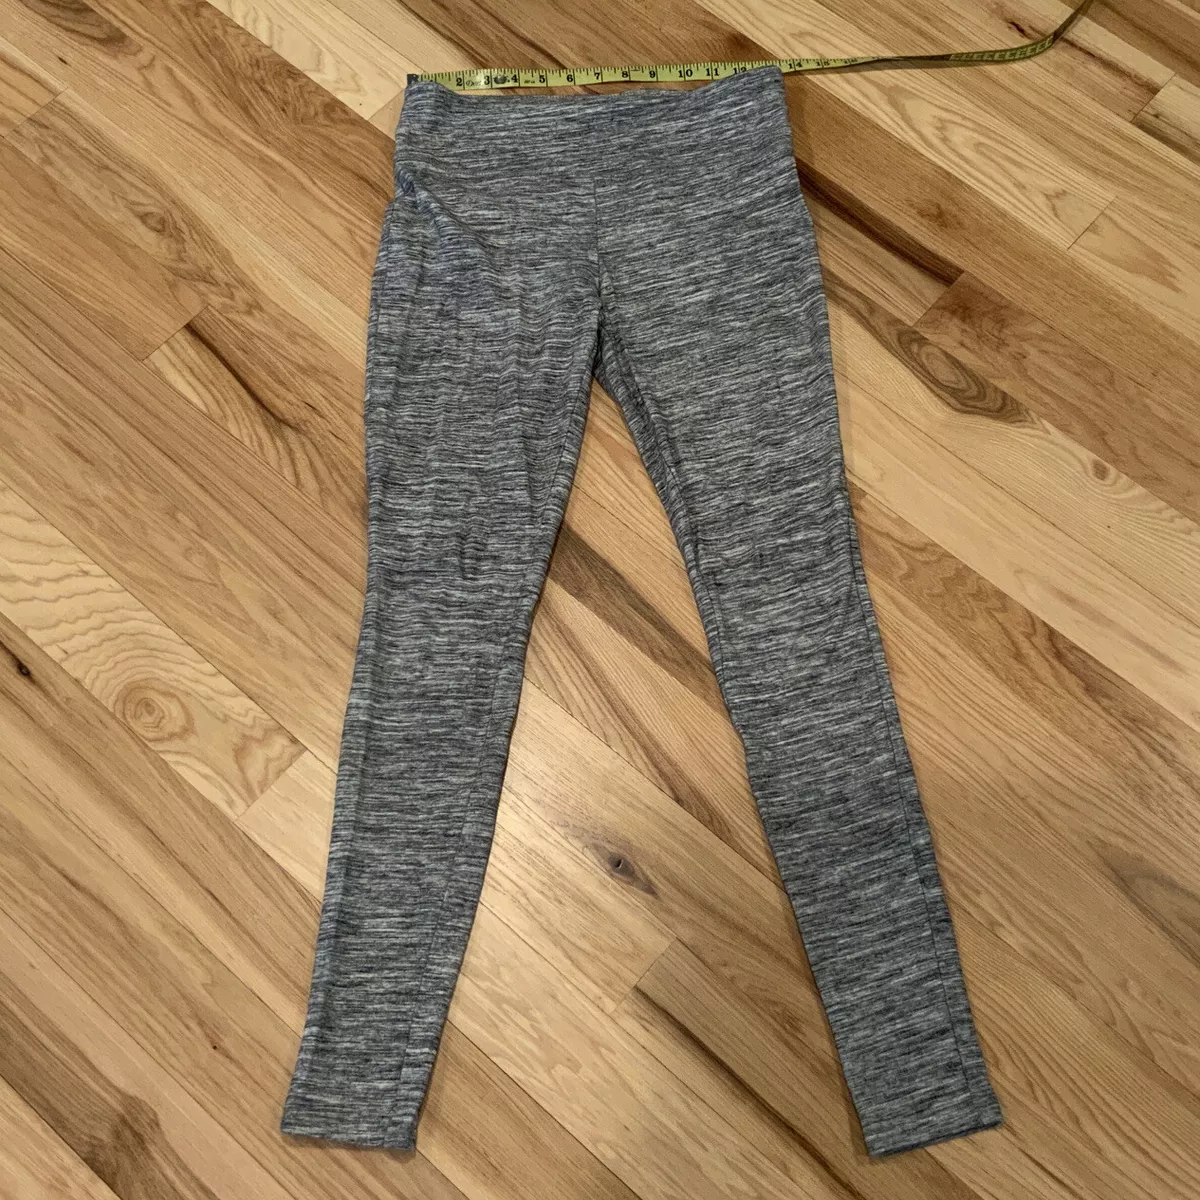 Mossimo Supply Co. womens, Grey leggings, Size Small, Pre Owned.